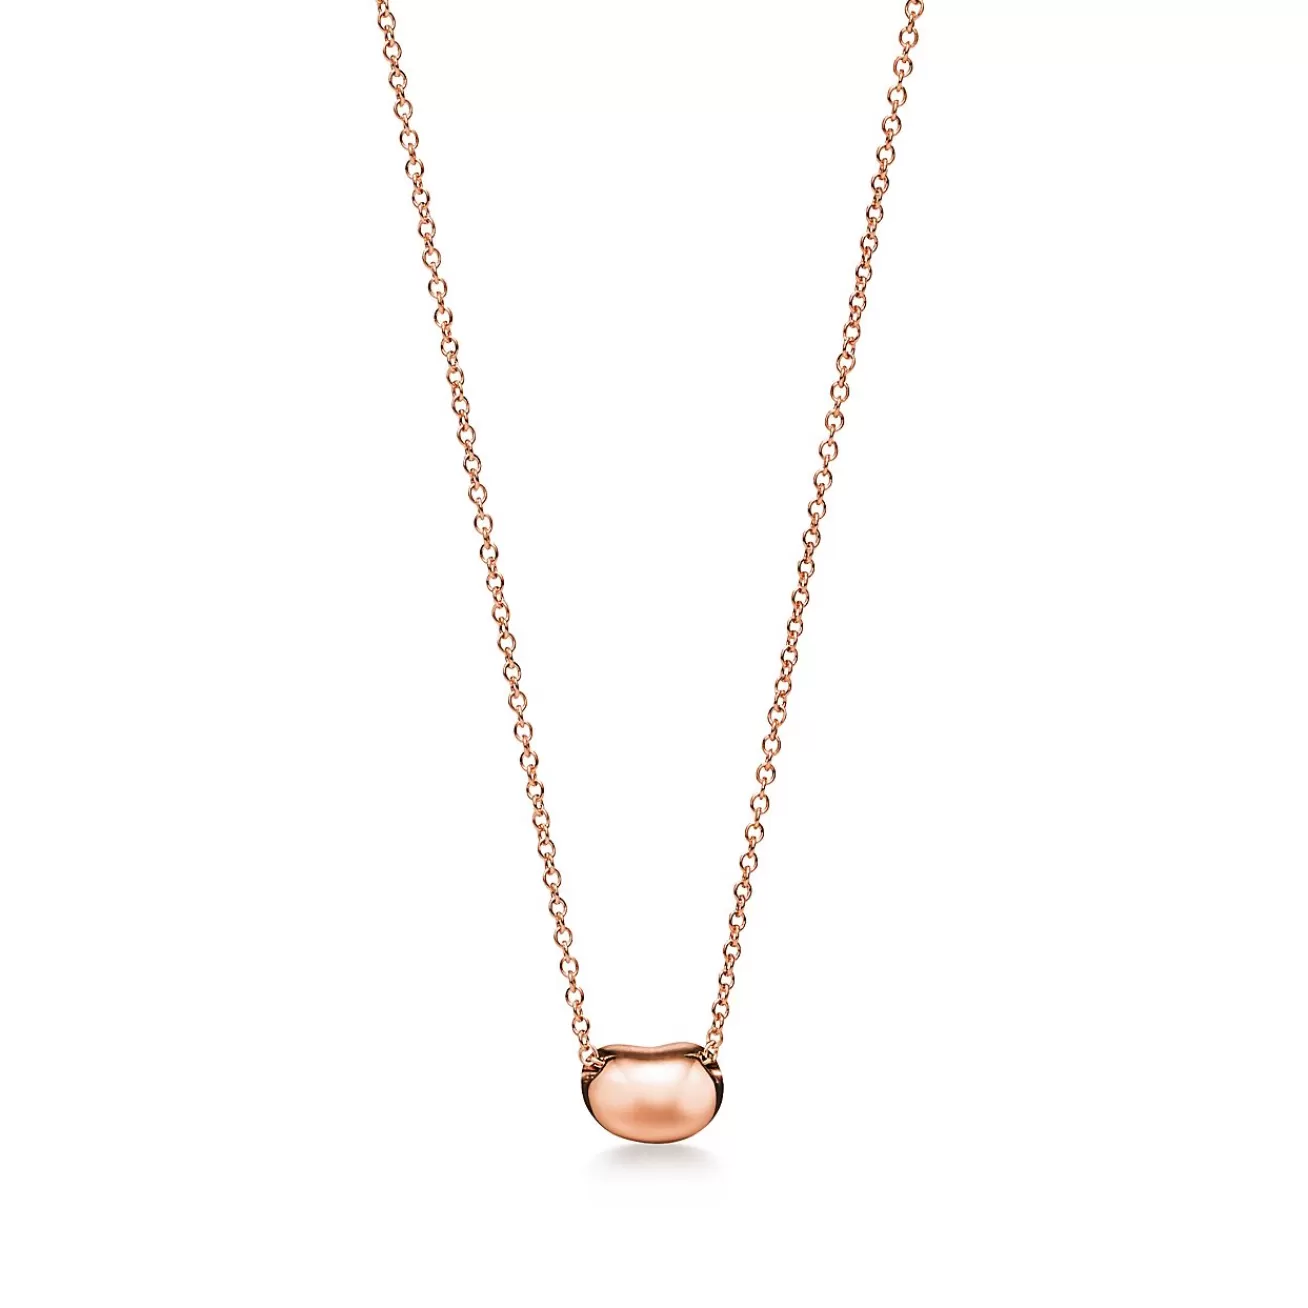 Tiffany & Co. Elsa Peretti® Bean® design Pendant in Rose Gold with Pavé Diamonds, 6.5 mm | ^ Necklaces & Pendants | Rose Gold Jewelry